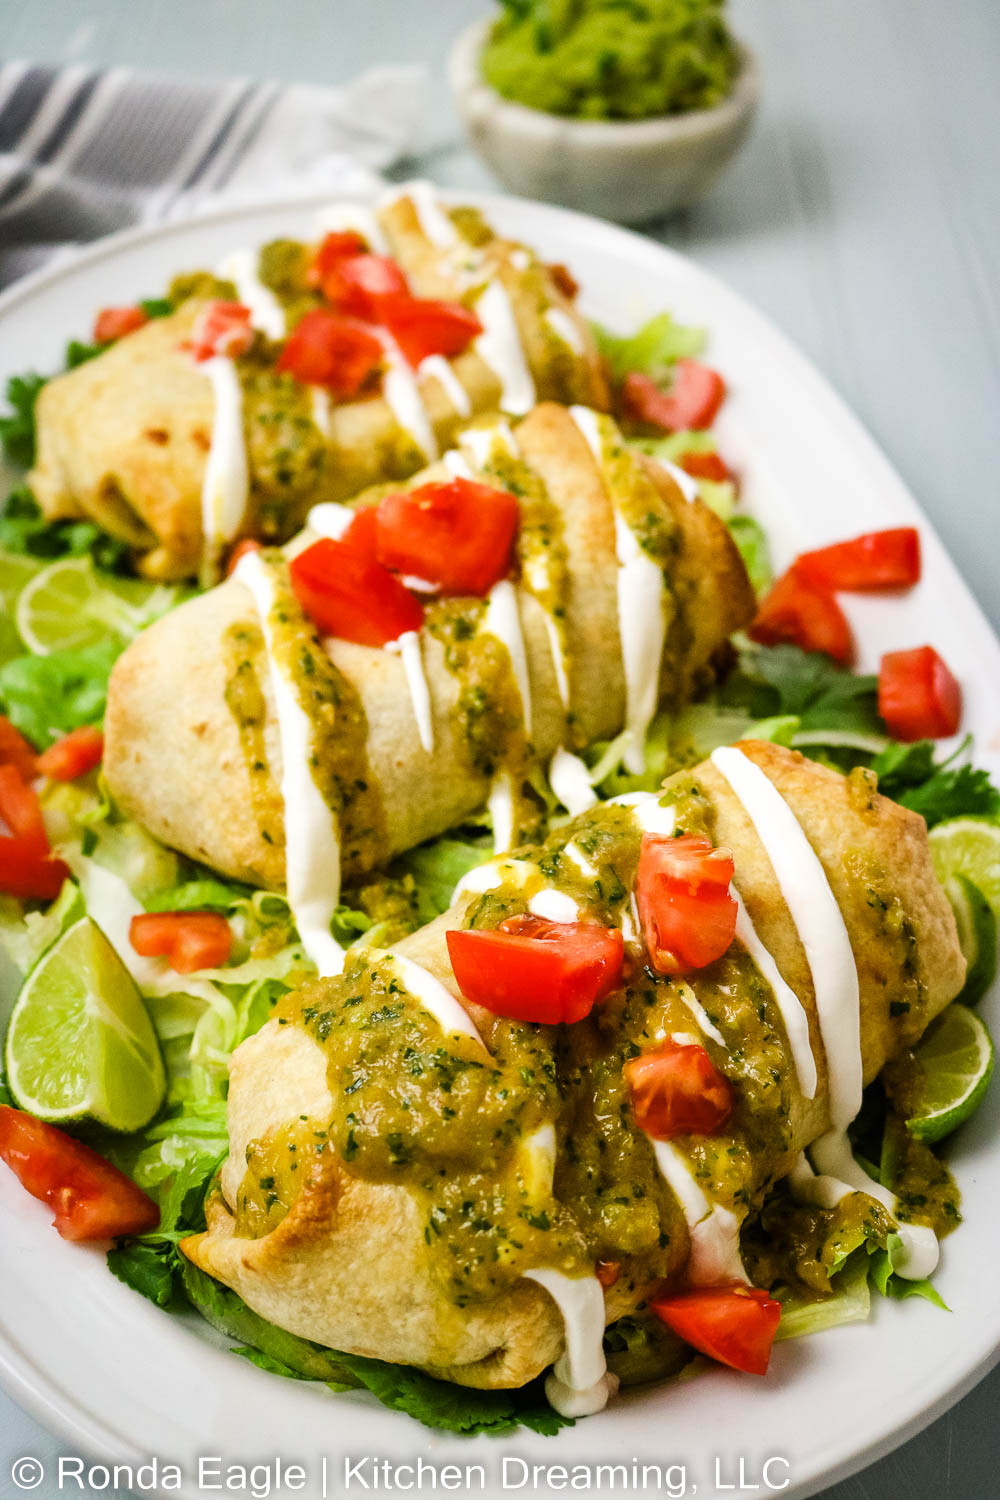 Baked Chimichangas with Chile Verde Sauce